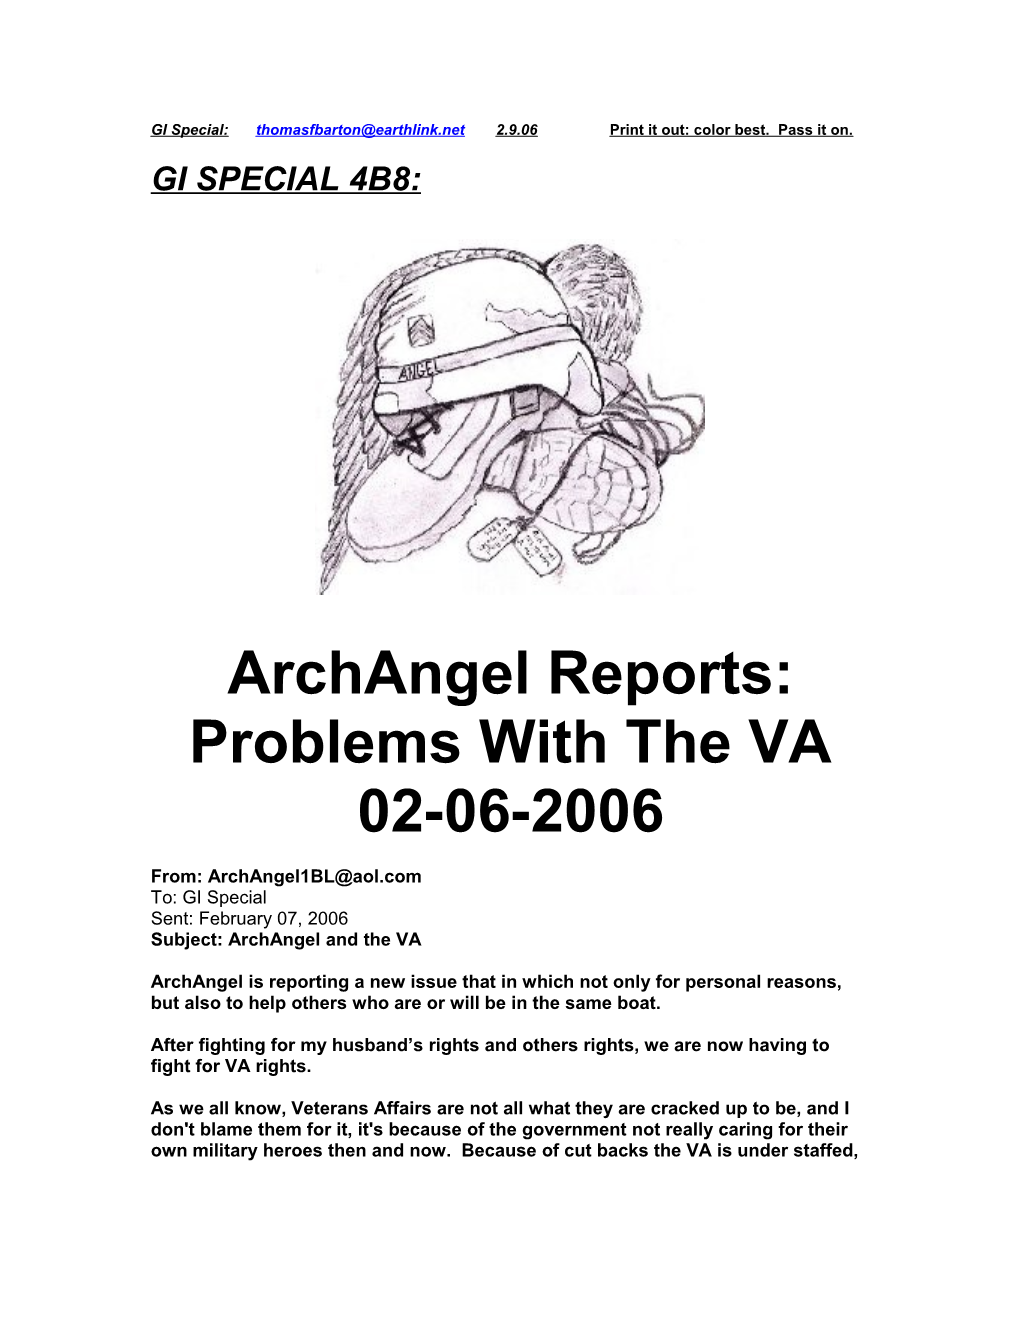 Subject: Archangel and the VA